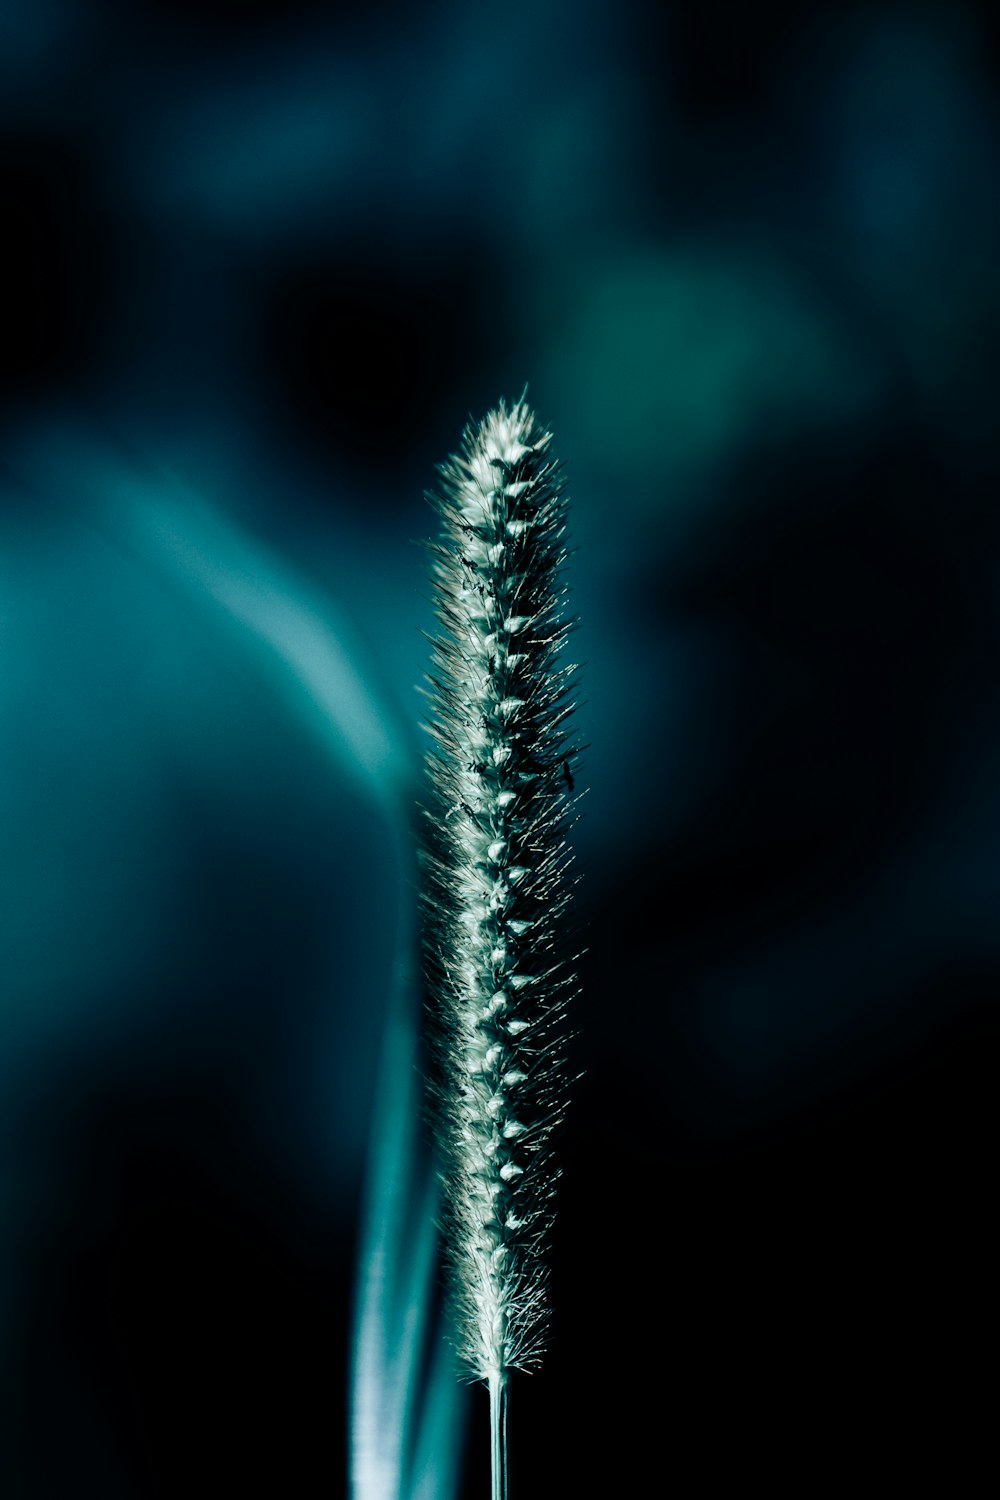 a close up of a toothbrush with a blurry background